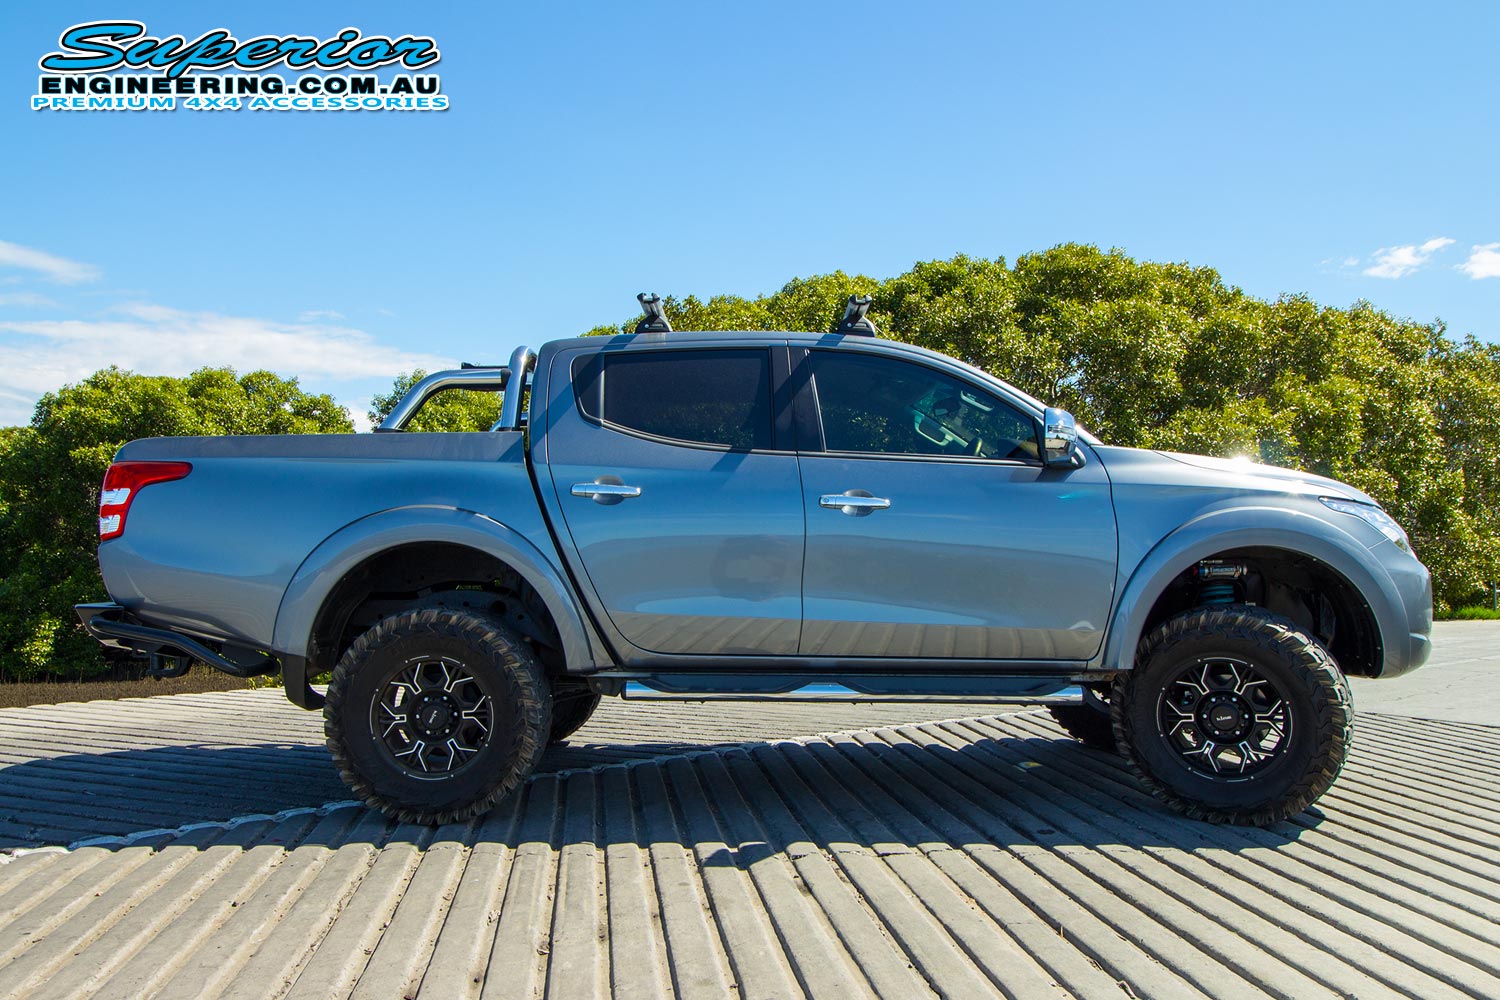 Right view of a MQ Mitsubishi Triton fitted with some Premium Superior Remote Reservoir Shocks and Struts at the Caboolture river boat ramp